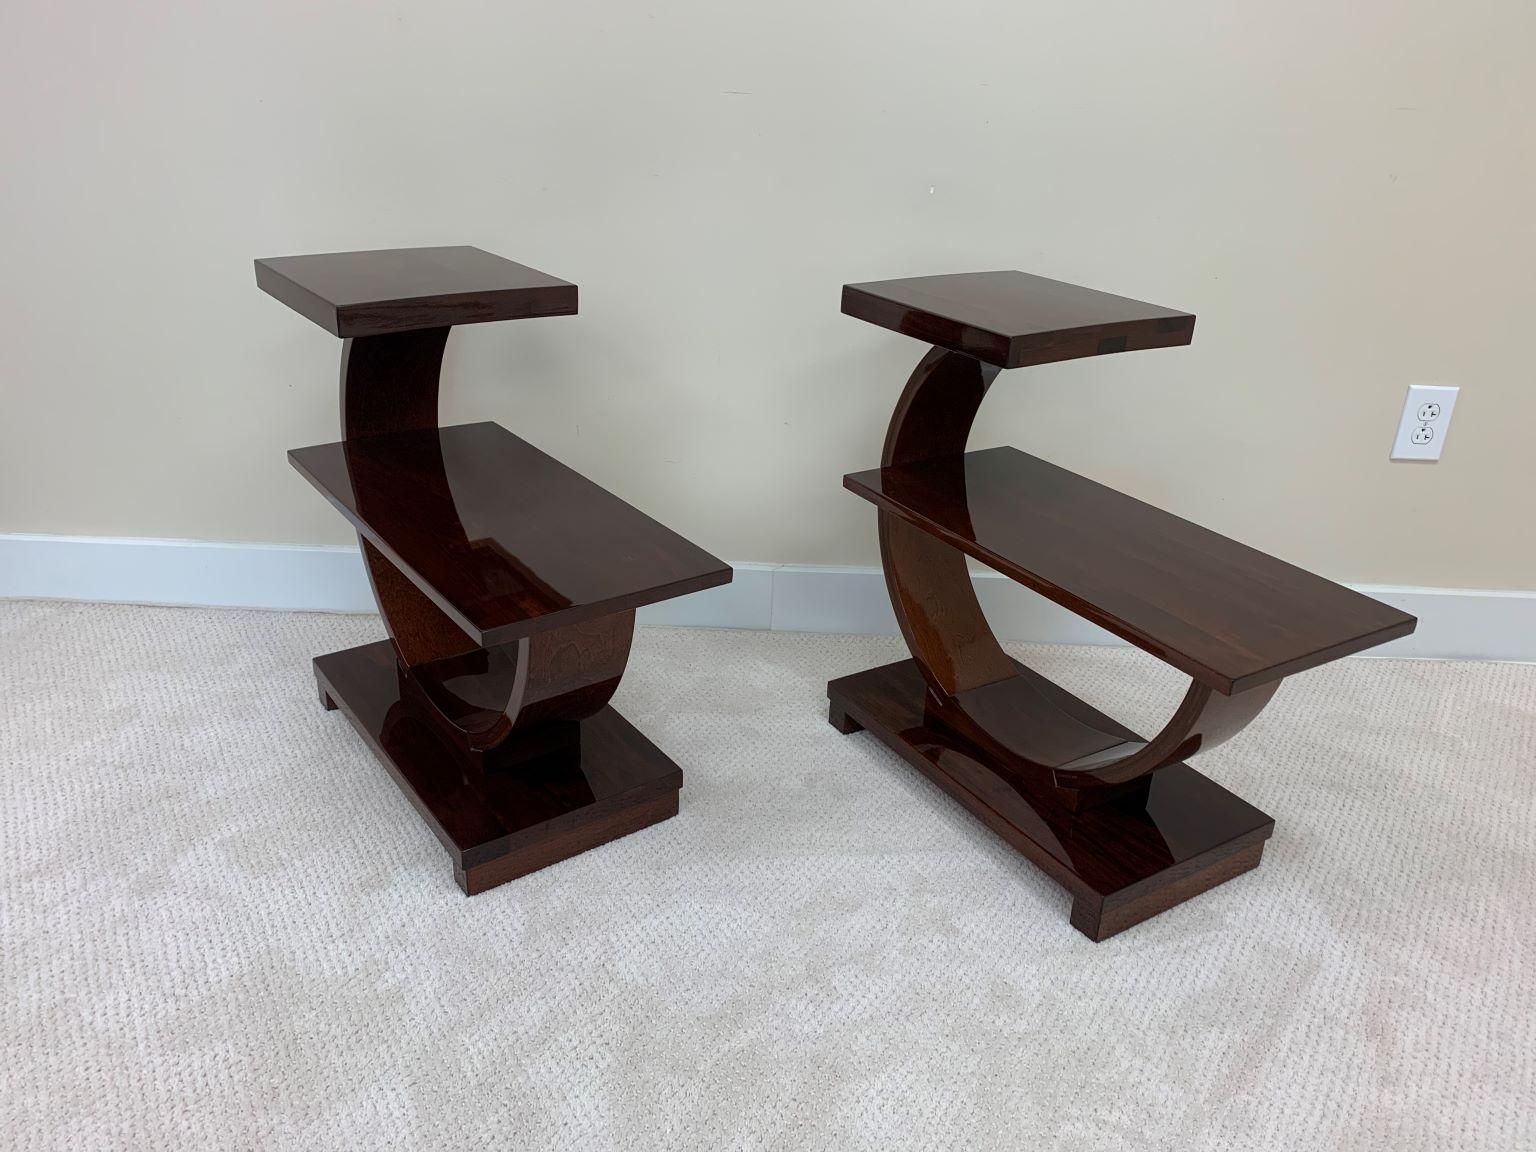 American Pair of Machine Age Art Deco Curving End Tables by Modernage Furniture Company